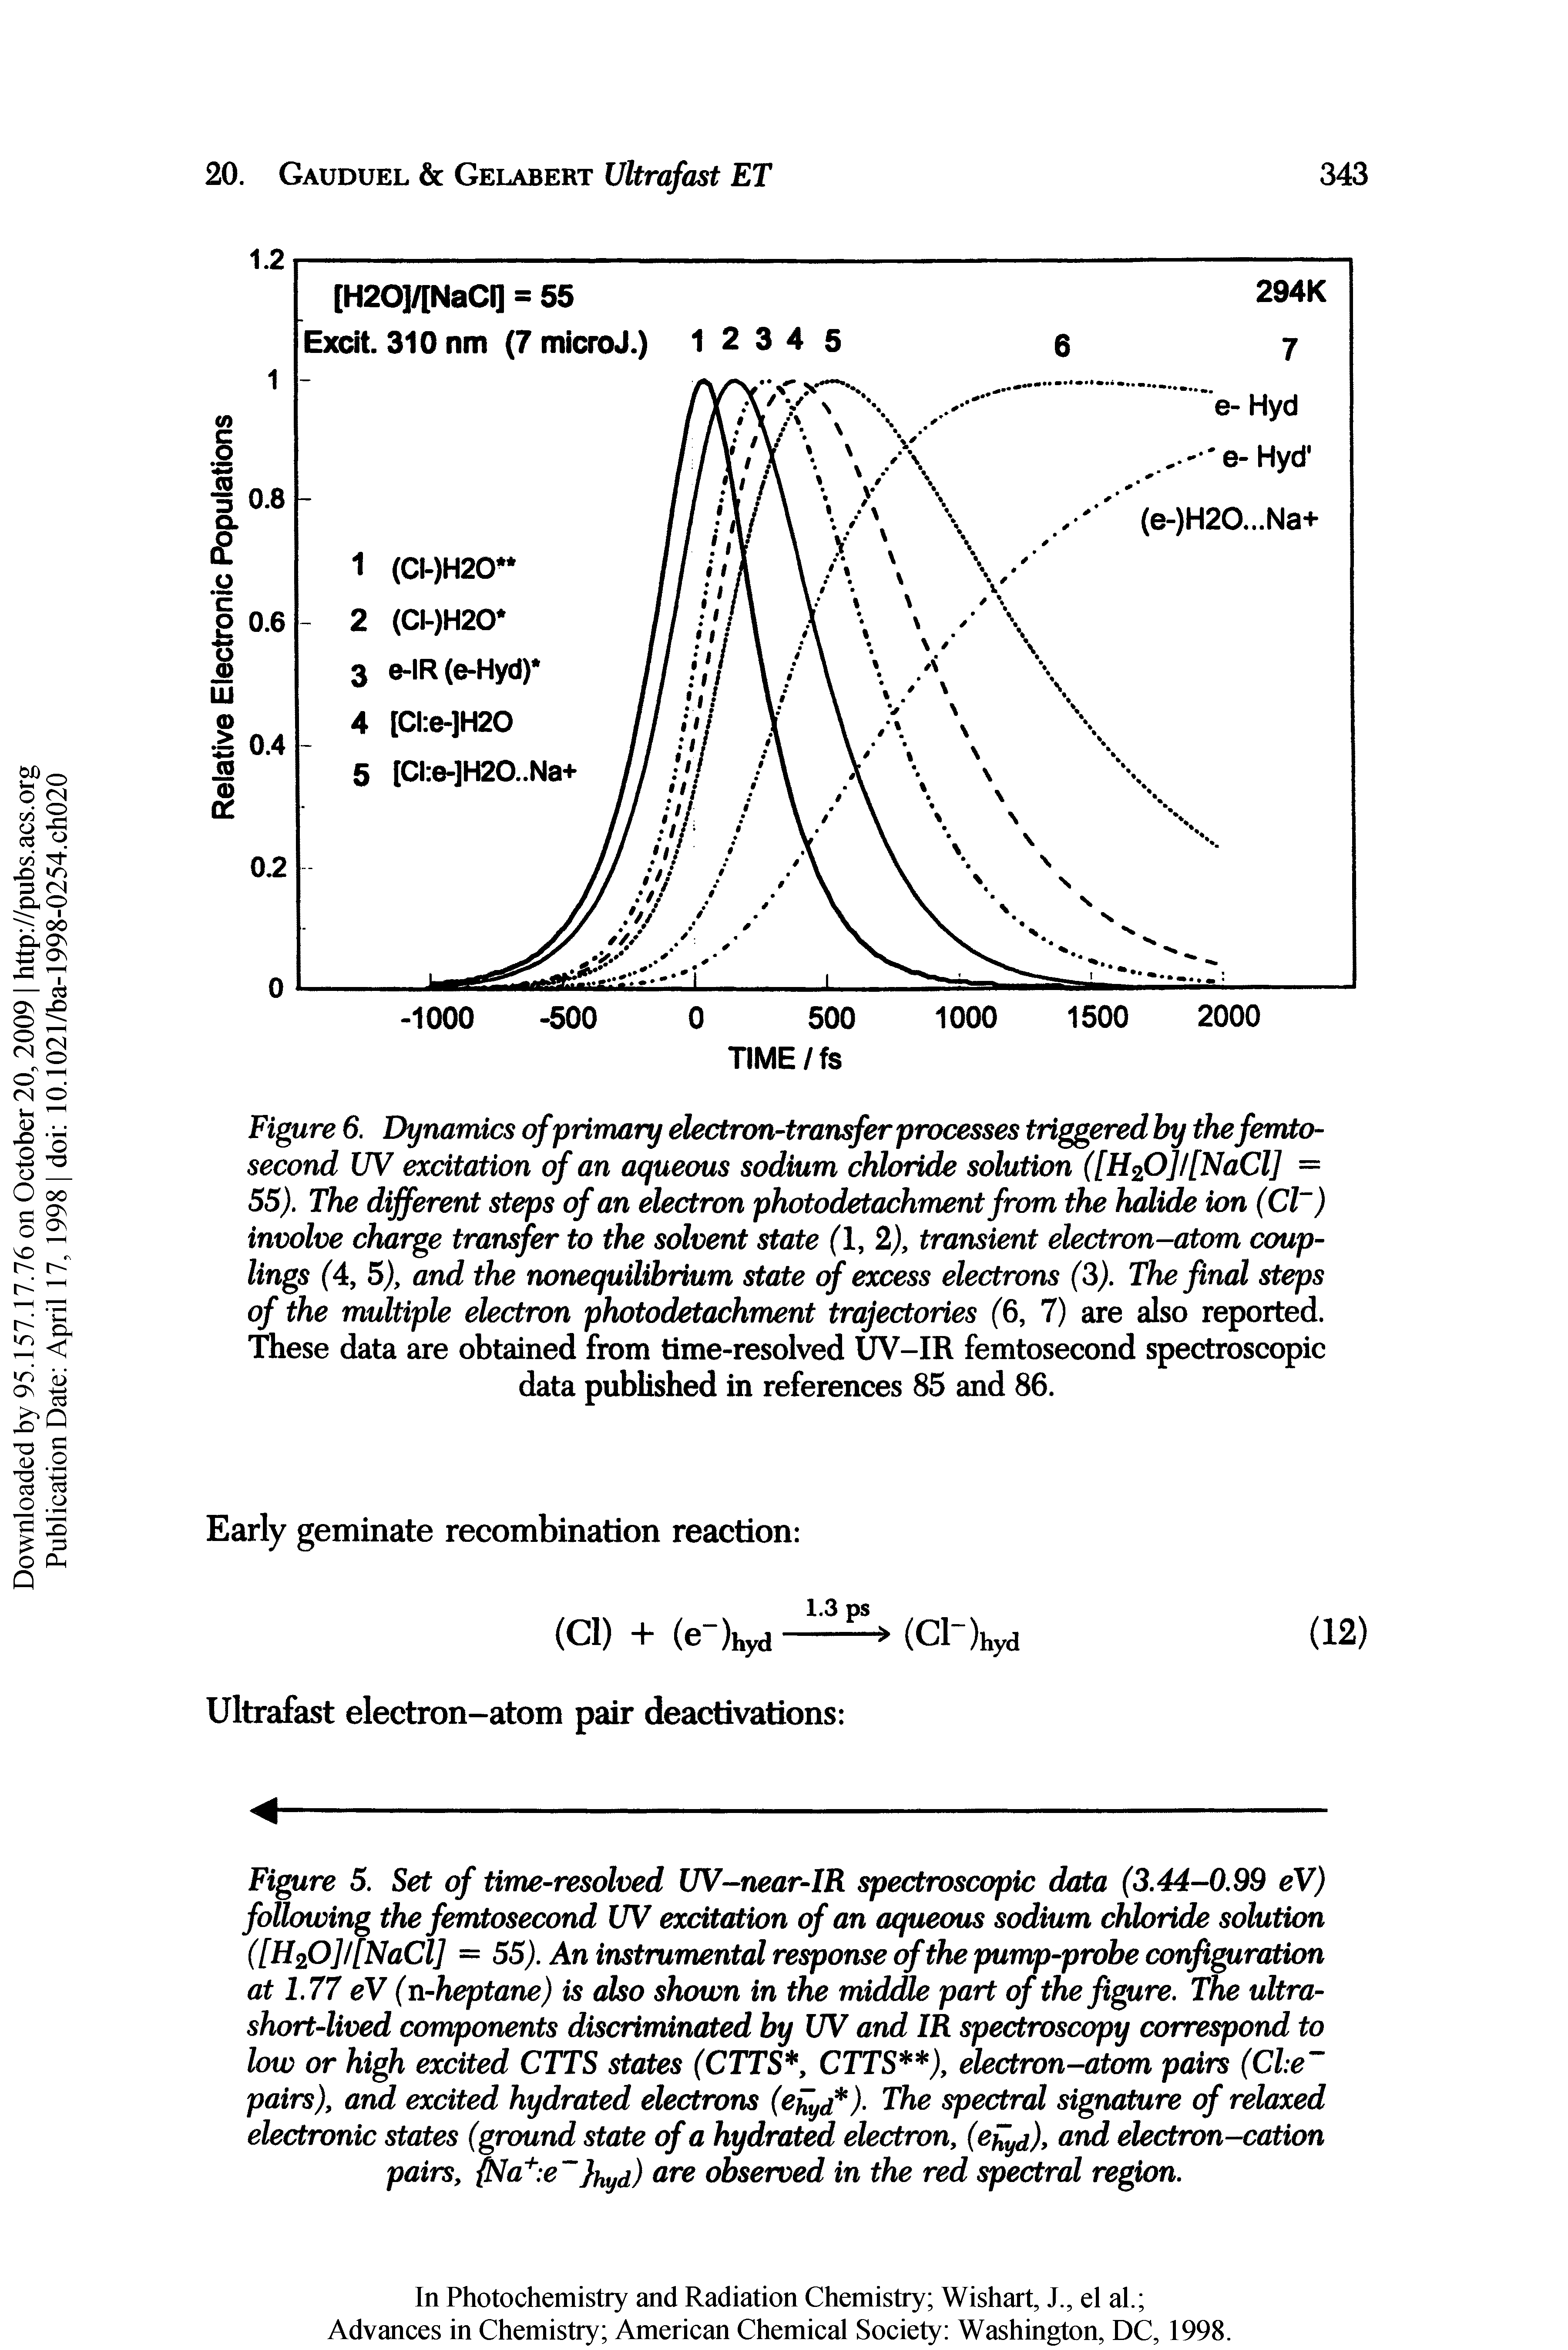 Figure 6. Dynamics ofprimary electron-transfer processes triggered hy the femtosecond UV excitation of an aqueous sodium chloride solution ([H20]/[NaCl] = 55). The different steps of an electron photodetachment from the halide ion (Cl ) involve charge transfer to the solvent state (1,2), transient electron-atom couplings (4, 5), and the nonequilibrium state of excess electrons (3). The final steps of the multiple electron photodetachment trajectories (6, 7) are also reported. These data are obtained from time-resolved UV-IR femtosecond spectroscopic data published in references 85 and 86.